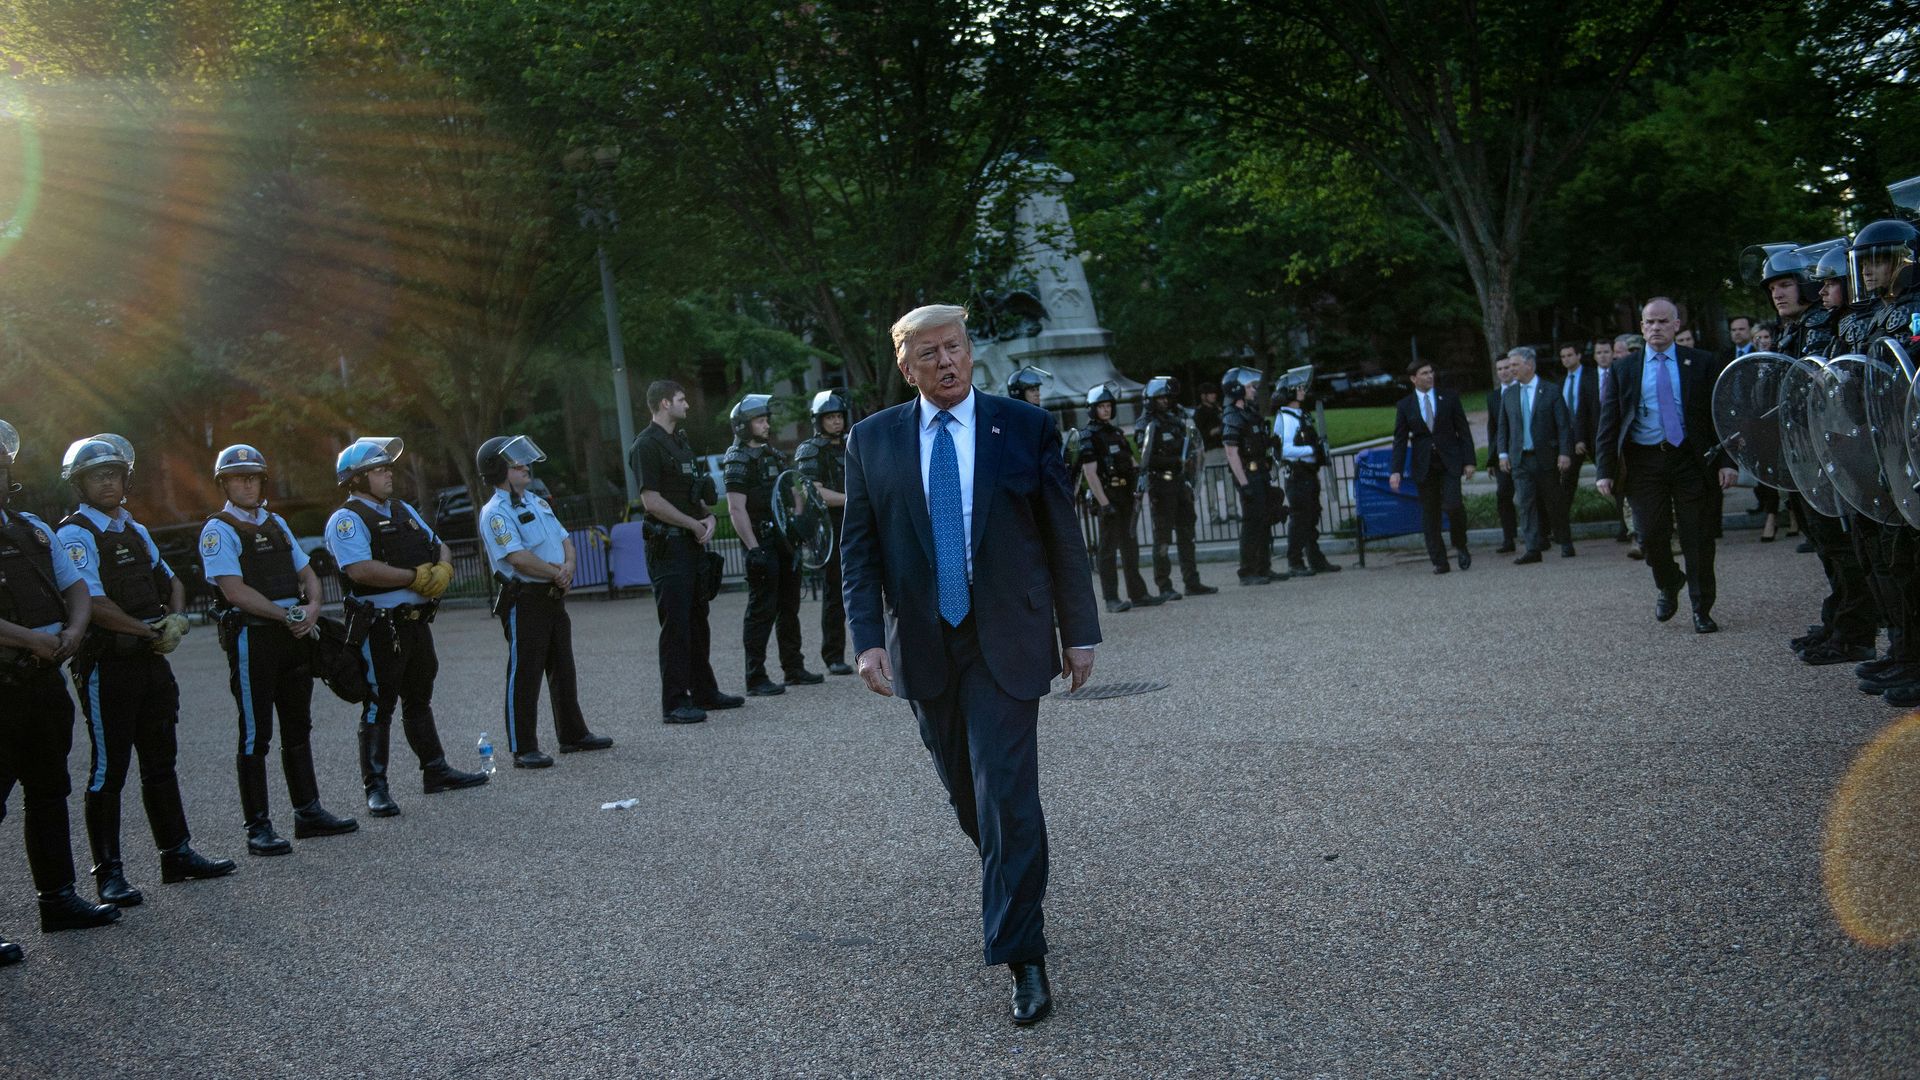 US President Donald Trump leaves the White House on foot to go to St John's Episcopal church across Lafayette Park as officers stand  behind him